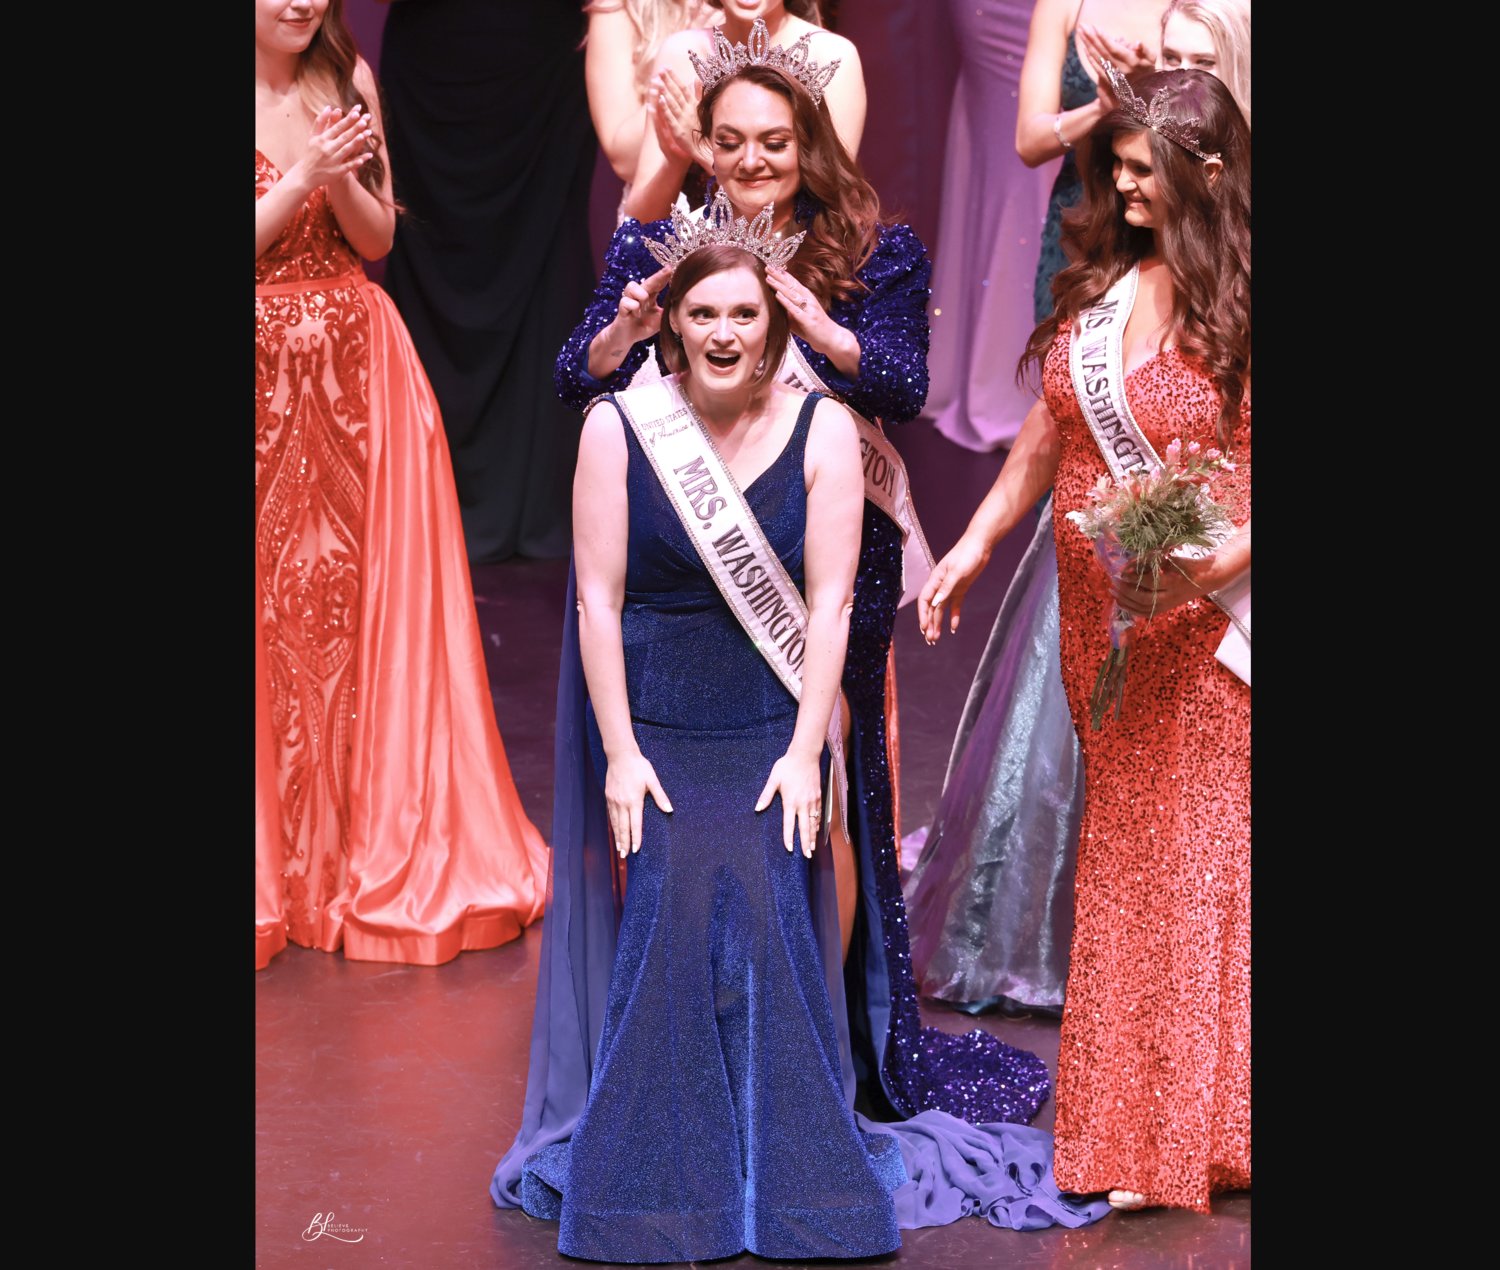 Emily (Parnham) Skeers, competing as Mrs. Olympia, was crowned Mrs. Washington in the United States of America’s Miss Oregon and Washington Pageant on Sunday, Sept. 18,